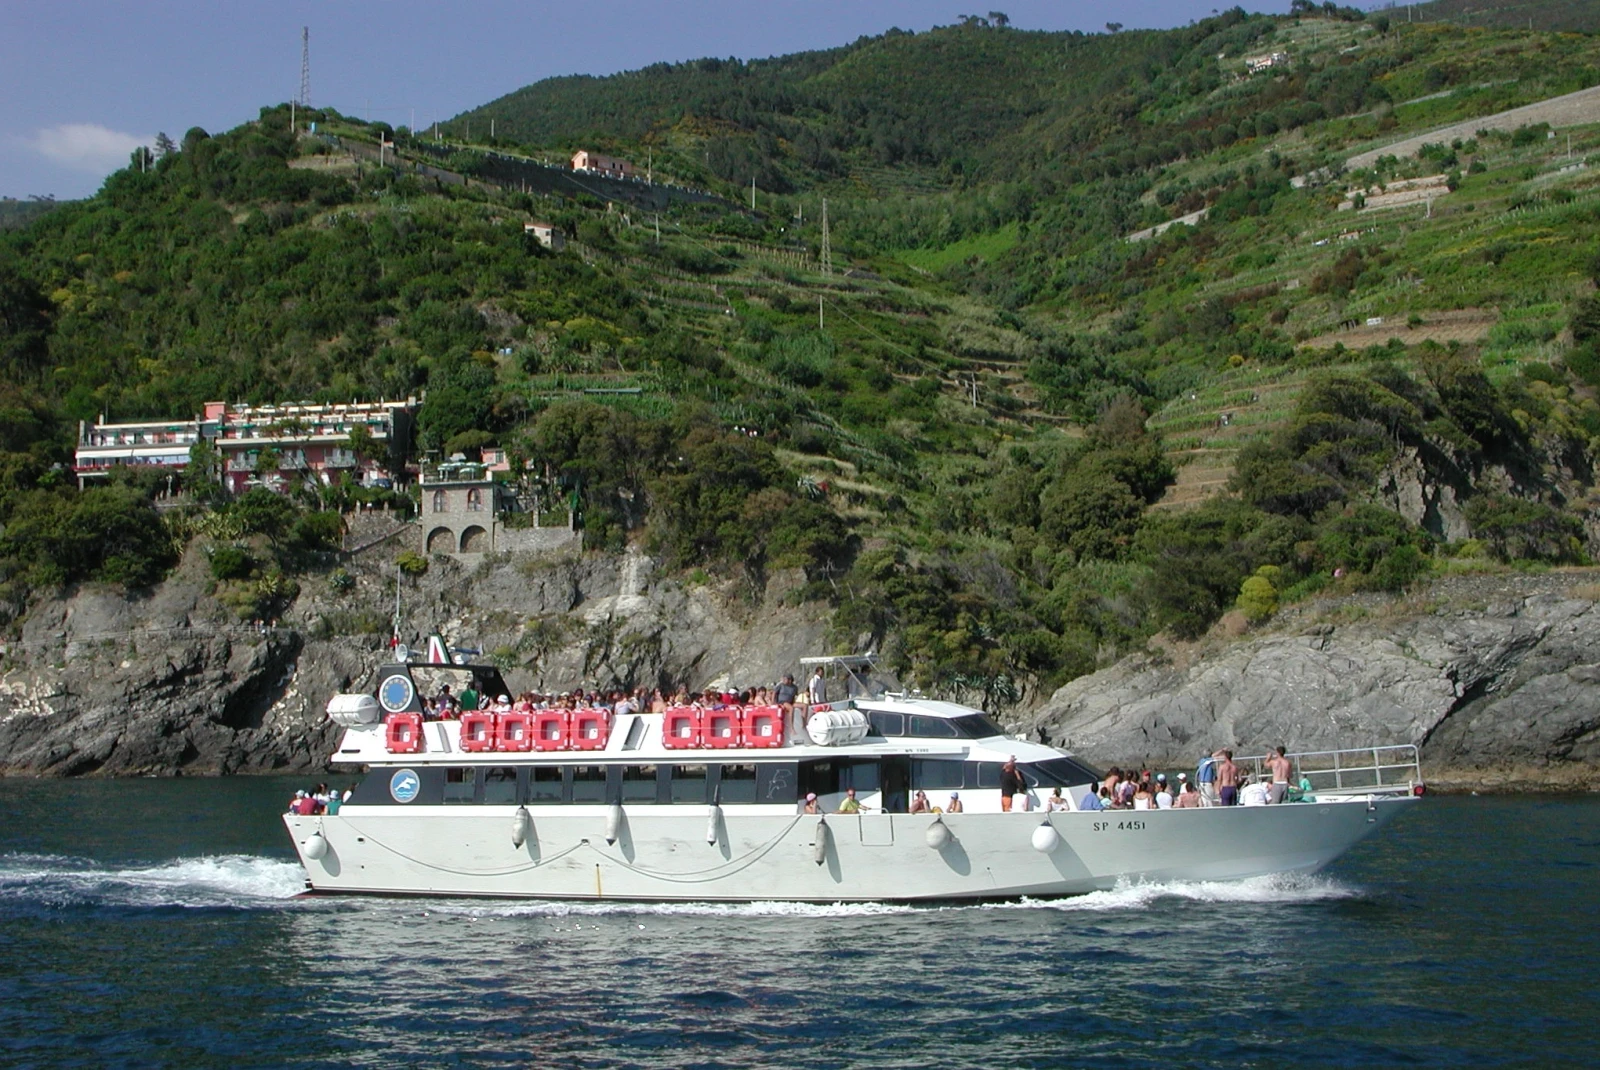 Consorzio Marittimo Turistico is the only official ferry line in the Cinque Terre.